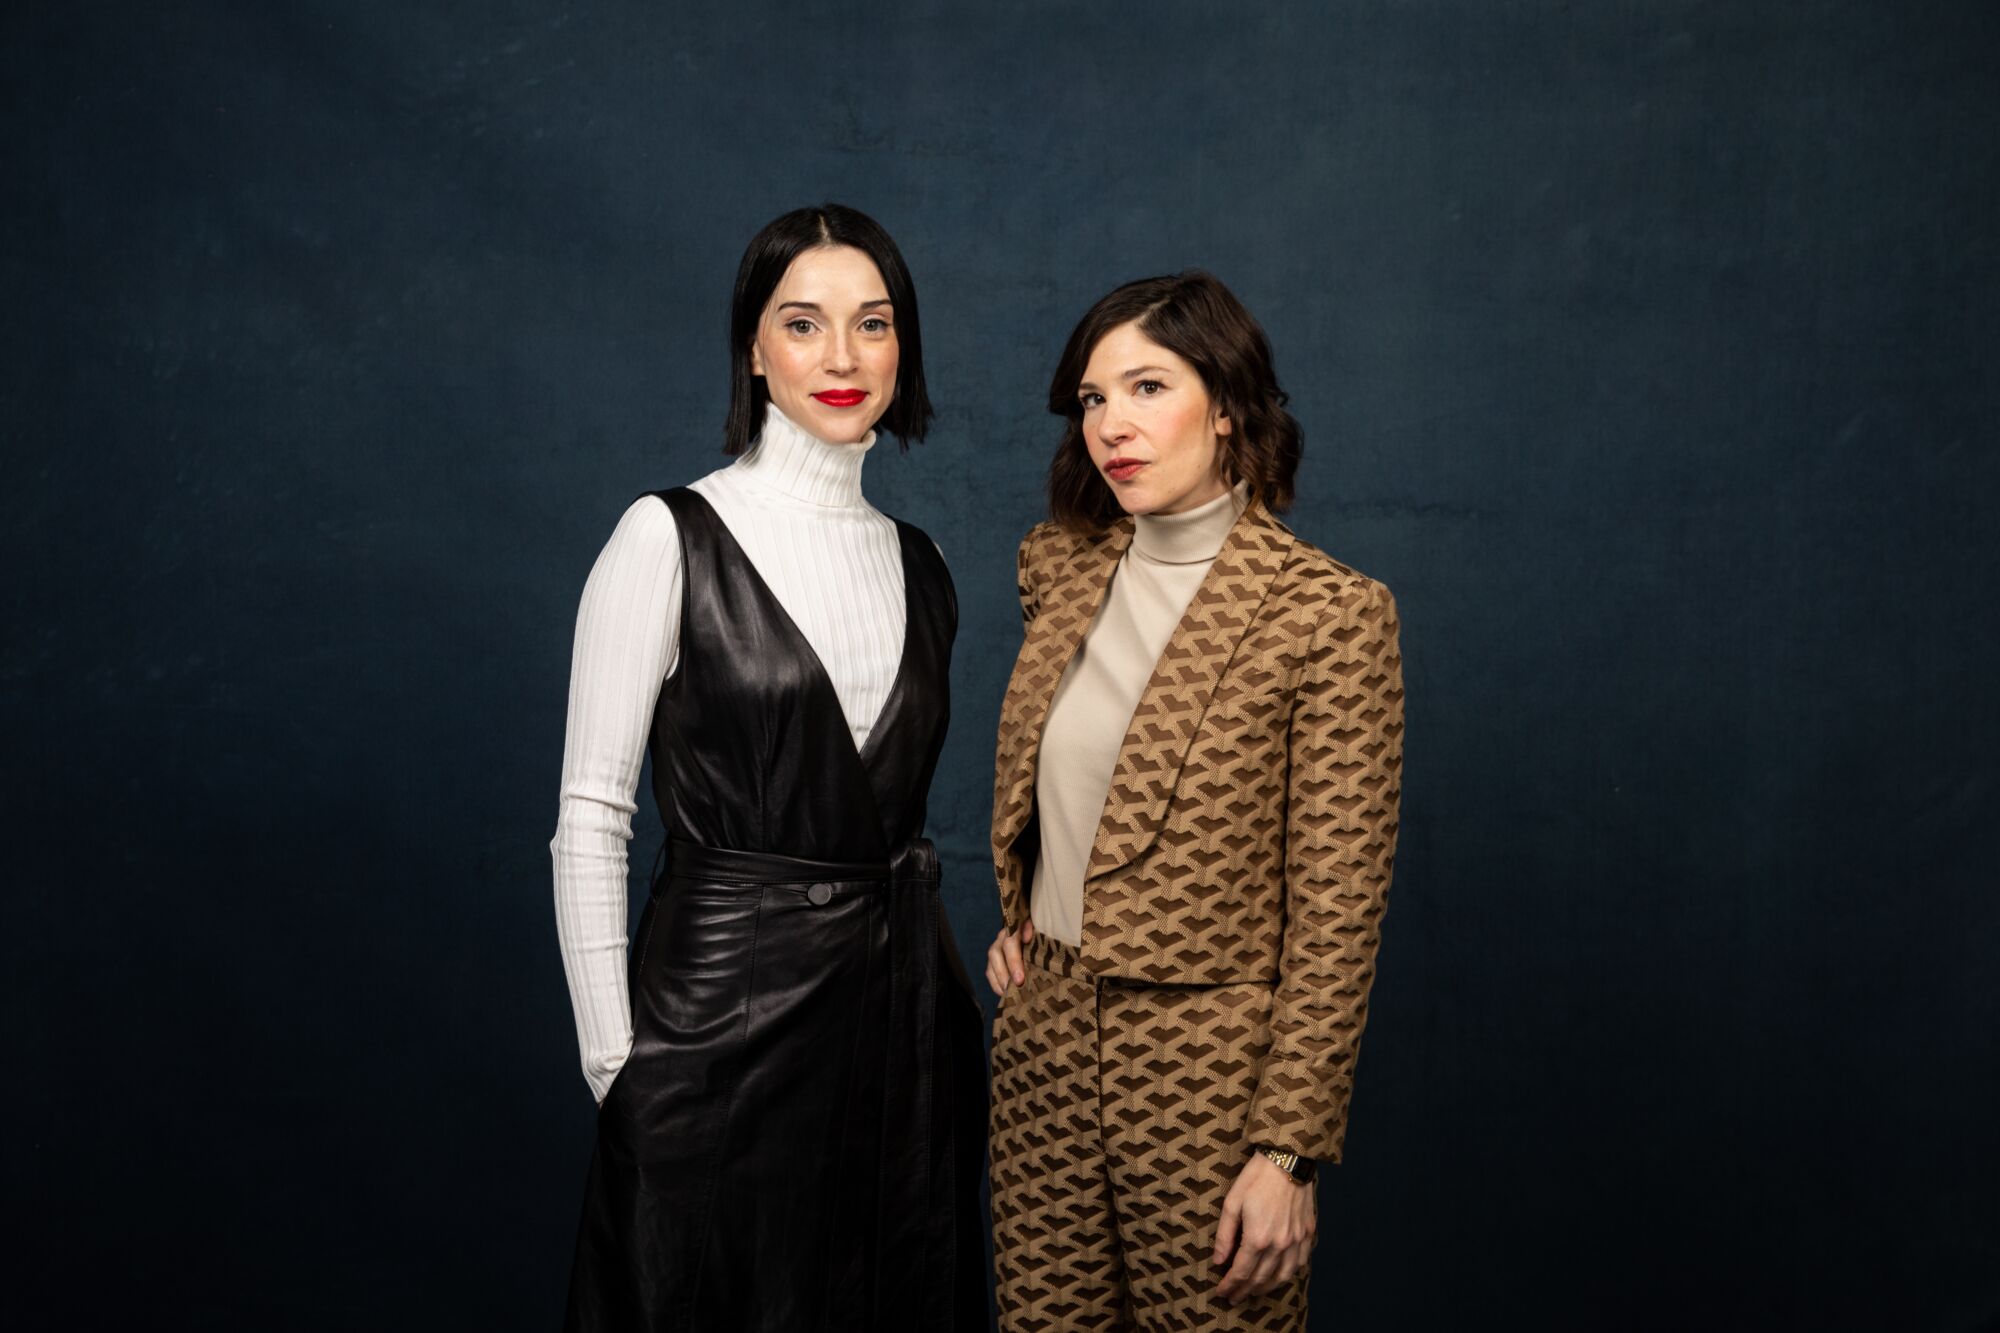 Actors Carrie Brownstein and Annie Clark (St. Vincent) of “The Nowhere Inn,” photographed in the L.A. Times Studio at the Sundance Film Festival.